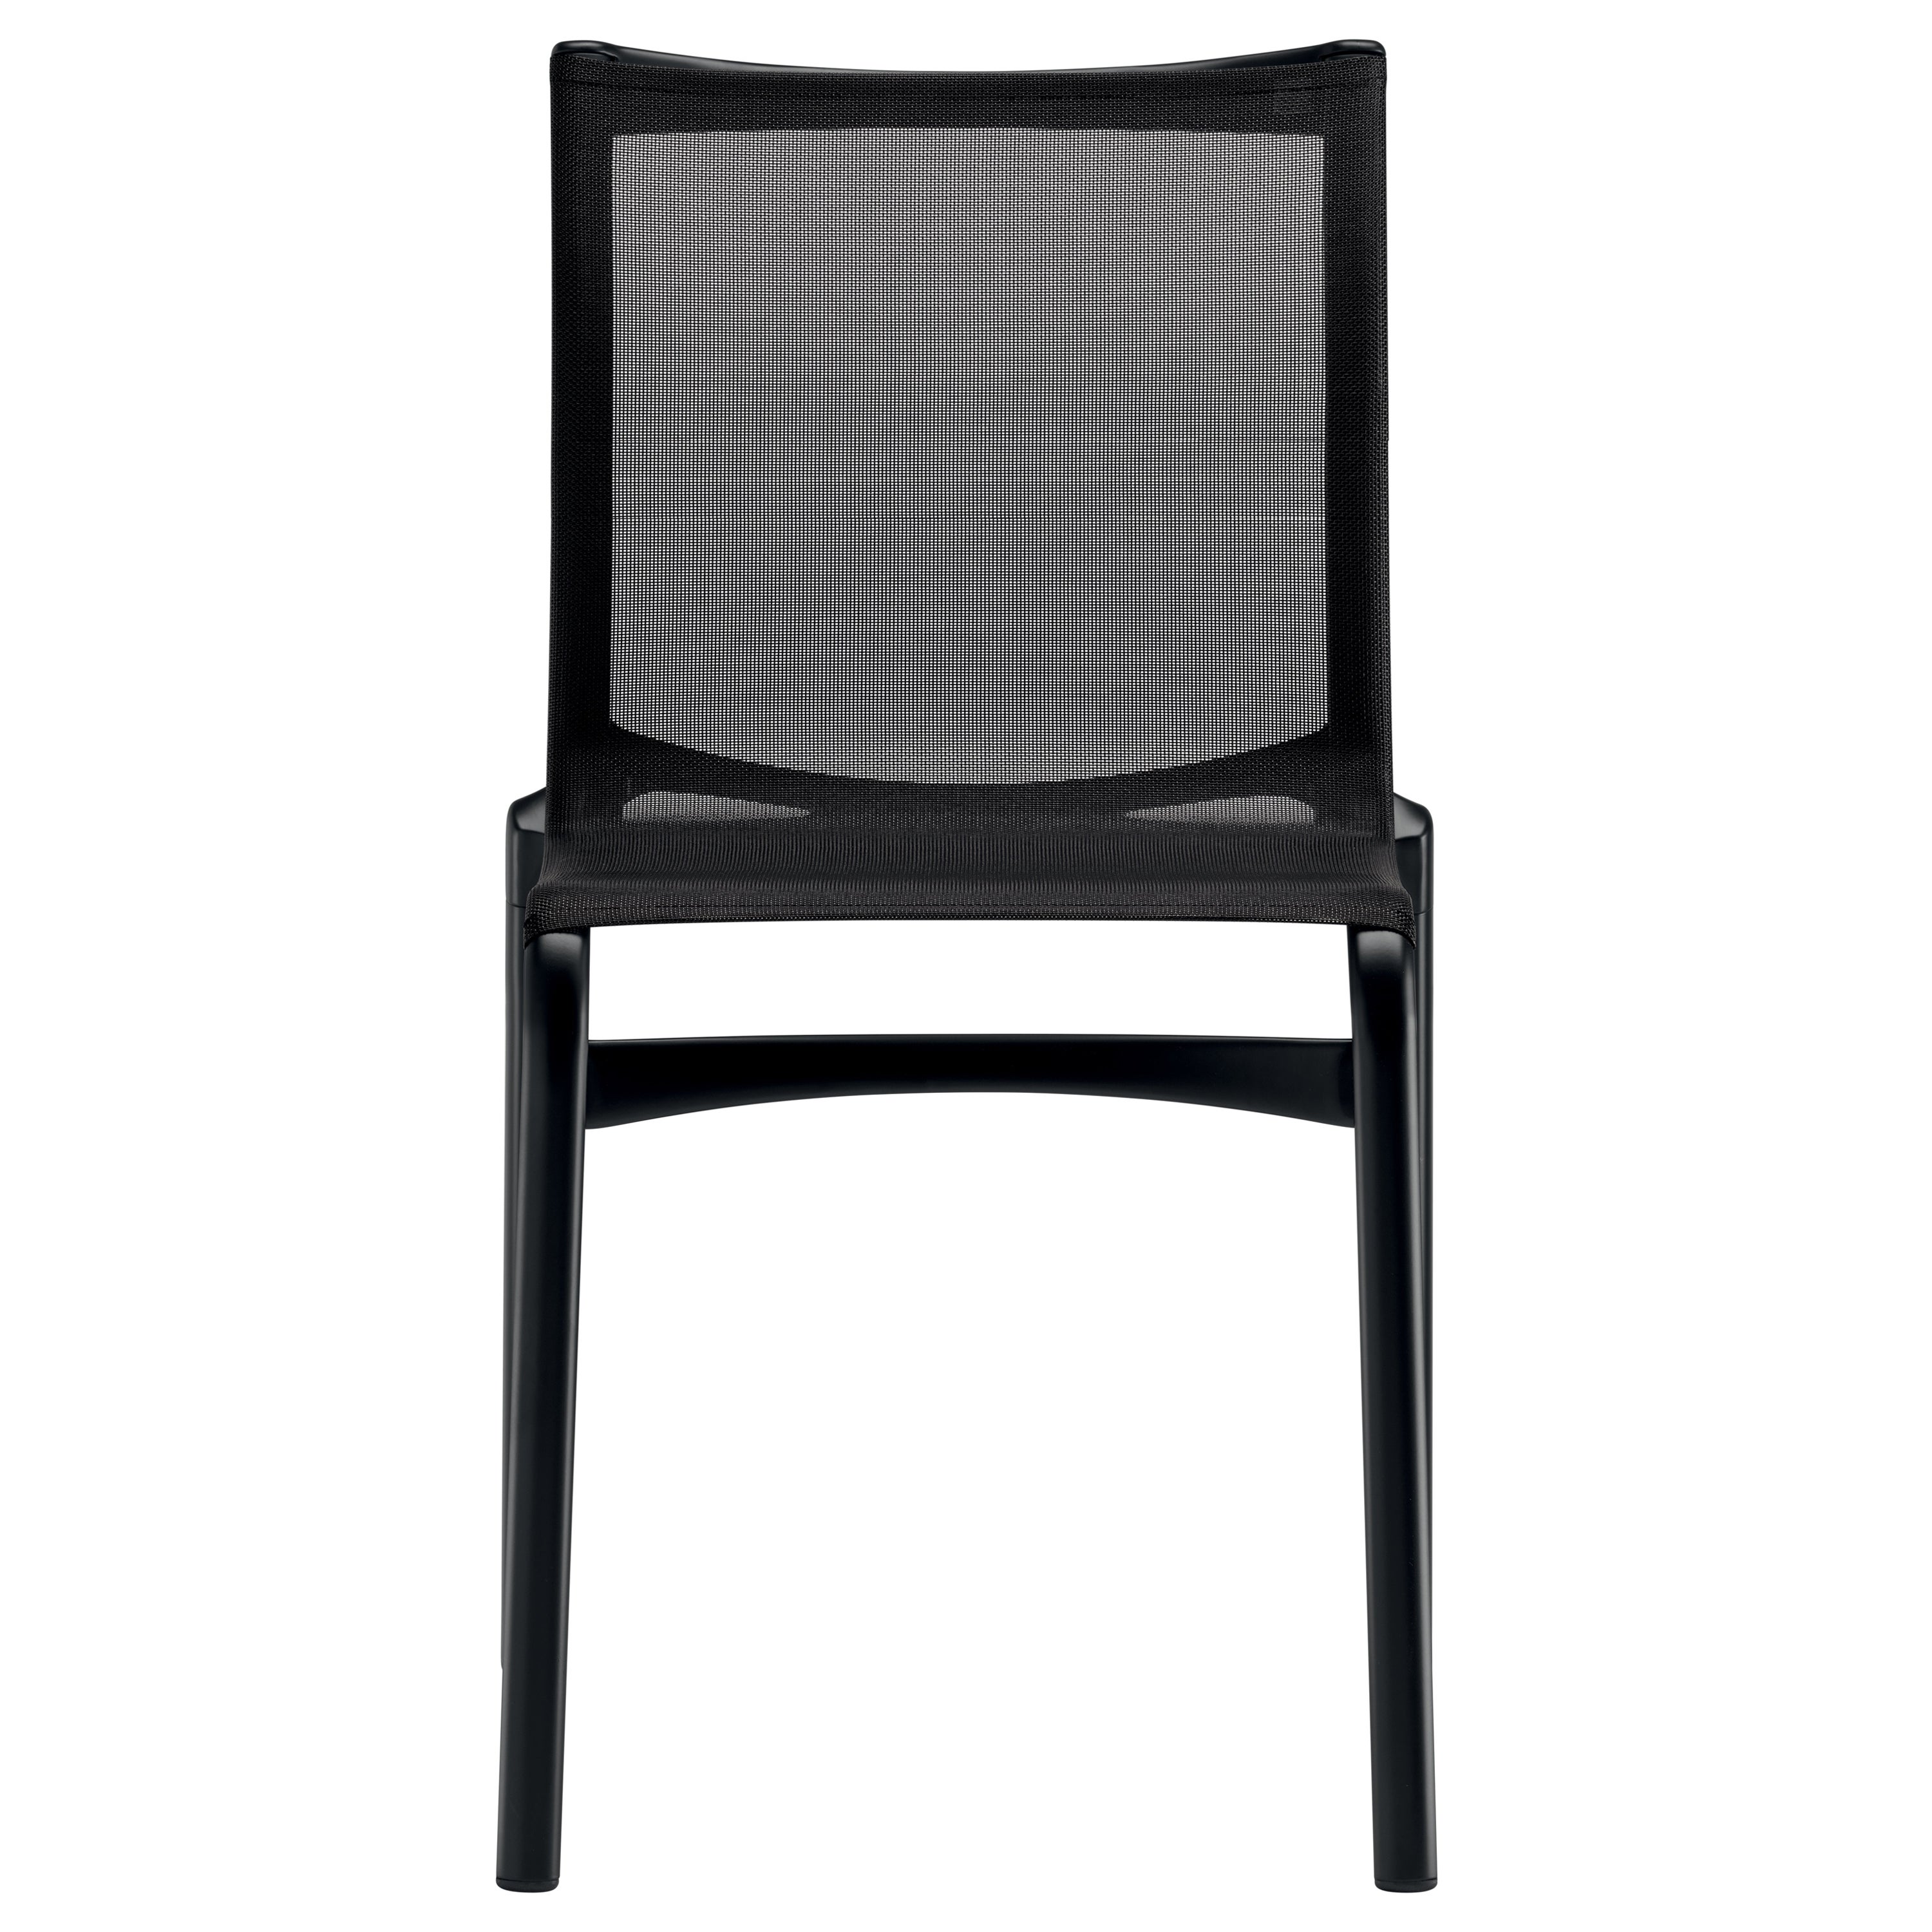 Alias Bigframe 44 Chair in Black Mesh Seat with Lacquered Aluminium Frame For Sale